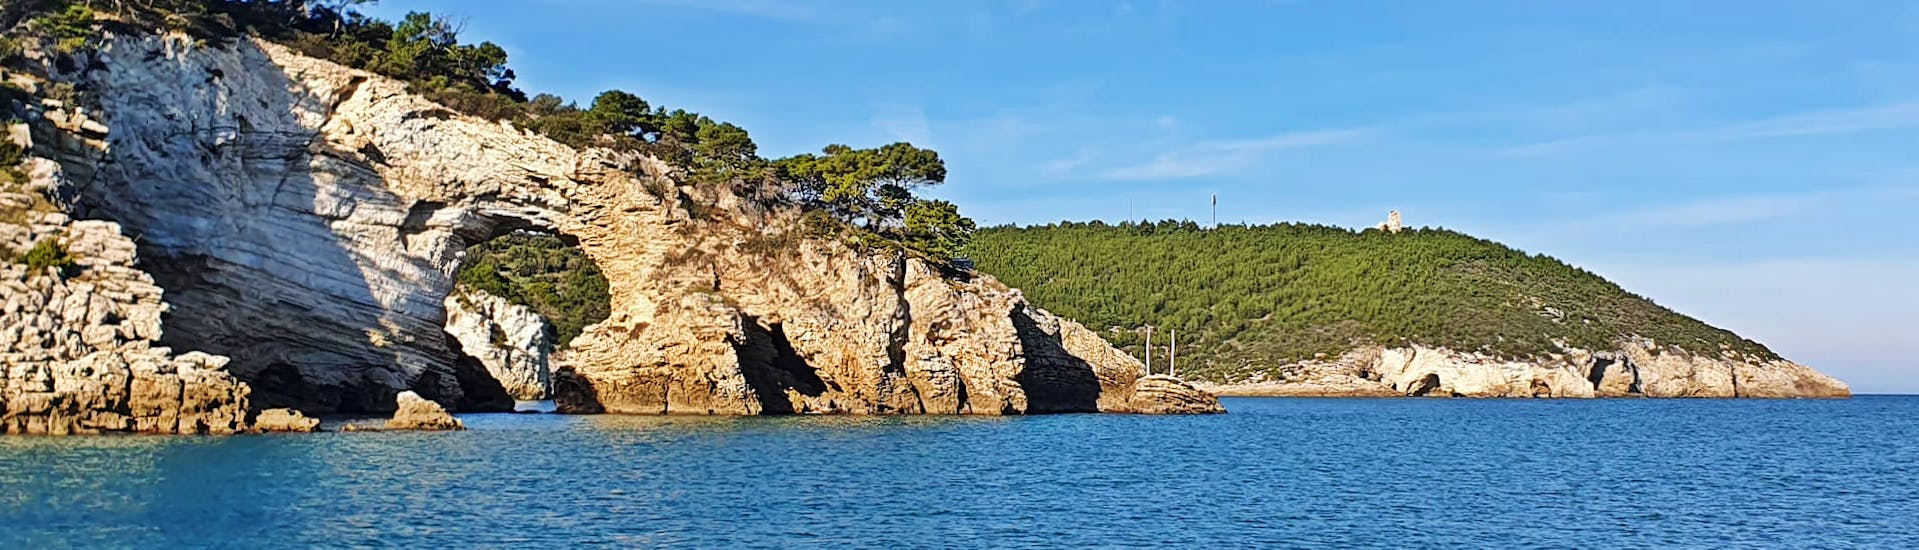 Picture of the Architiello taken from the gulet from Caicco Eco Freedom during the Boat Trip from Vieste to the Gargano Coast with Apéritif.